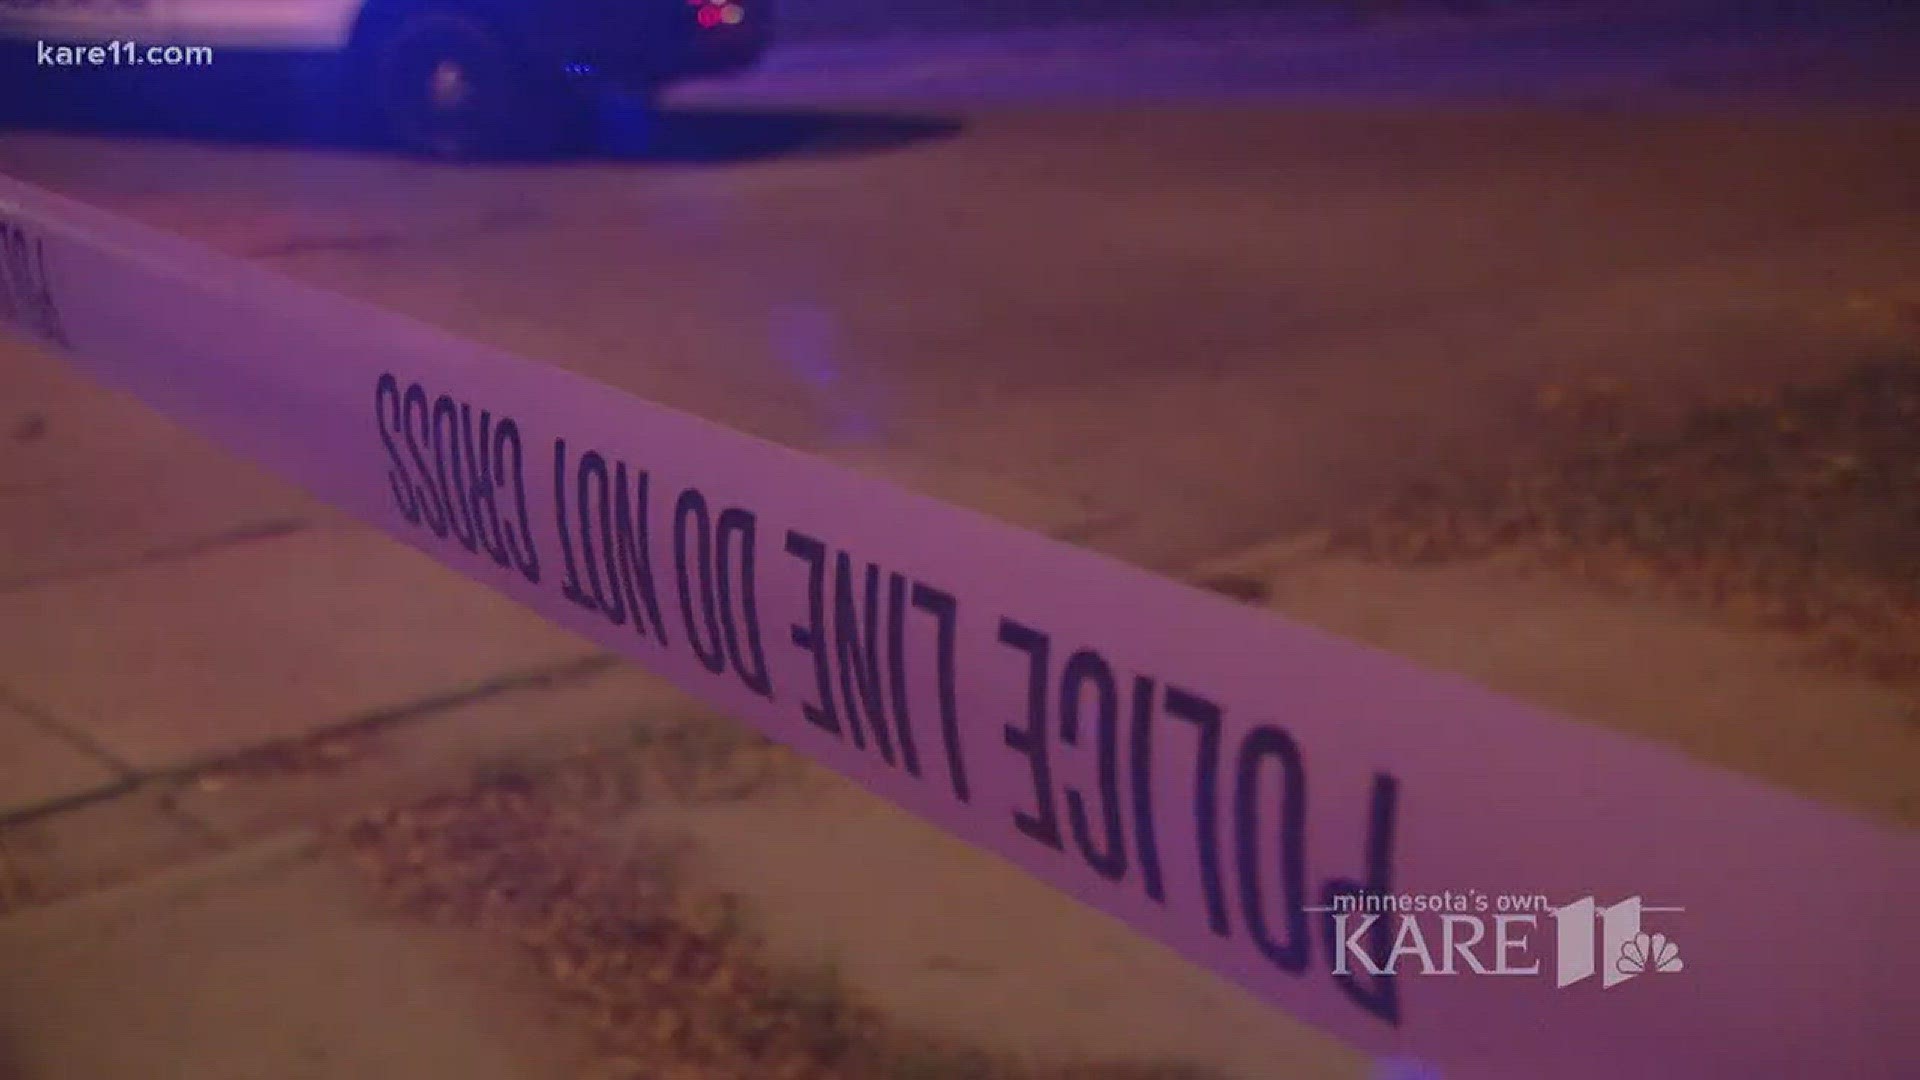 A man was shot and killed early Sunday morning on the 900 block of University Ave. in St. Paul. Sunday's homicide comes a day after a man was shot and killed in St. Paul's Frogtown neighborhood early Saturday morning. http://kare11.tv/2yHf3ax